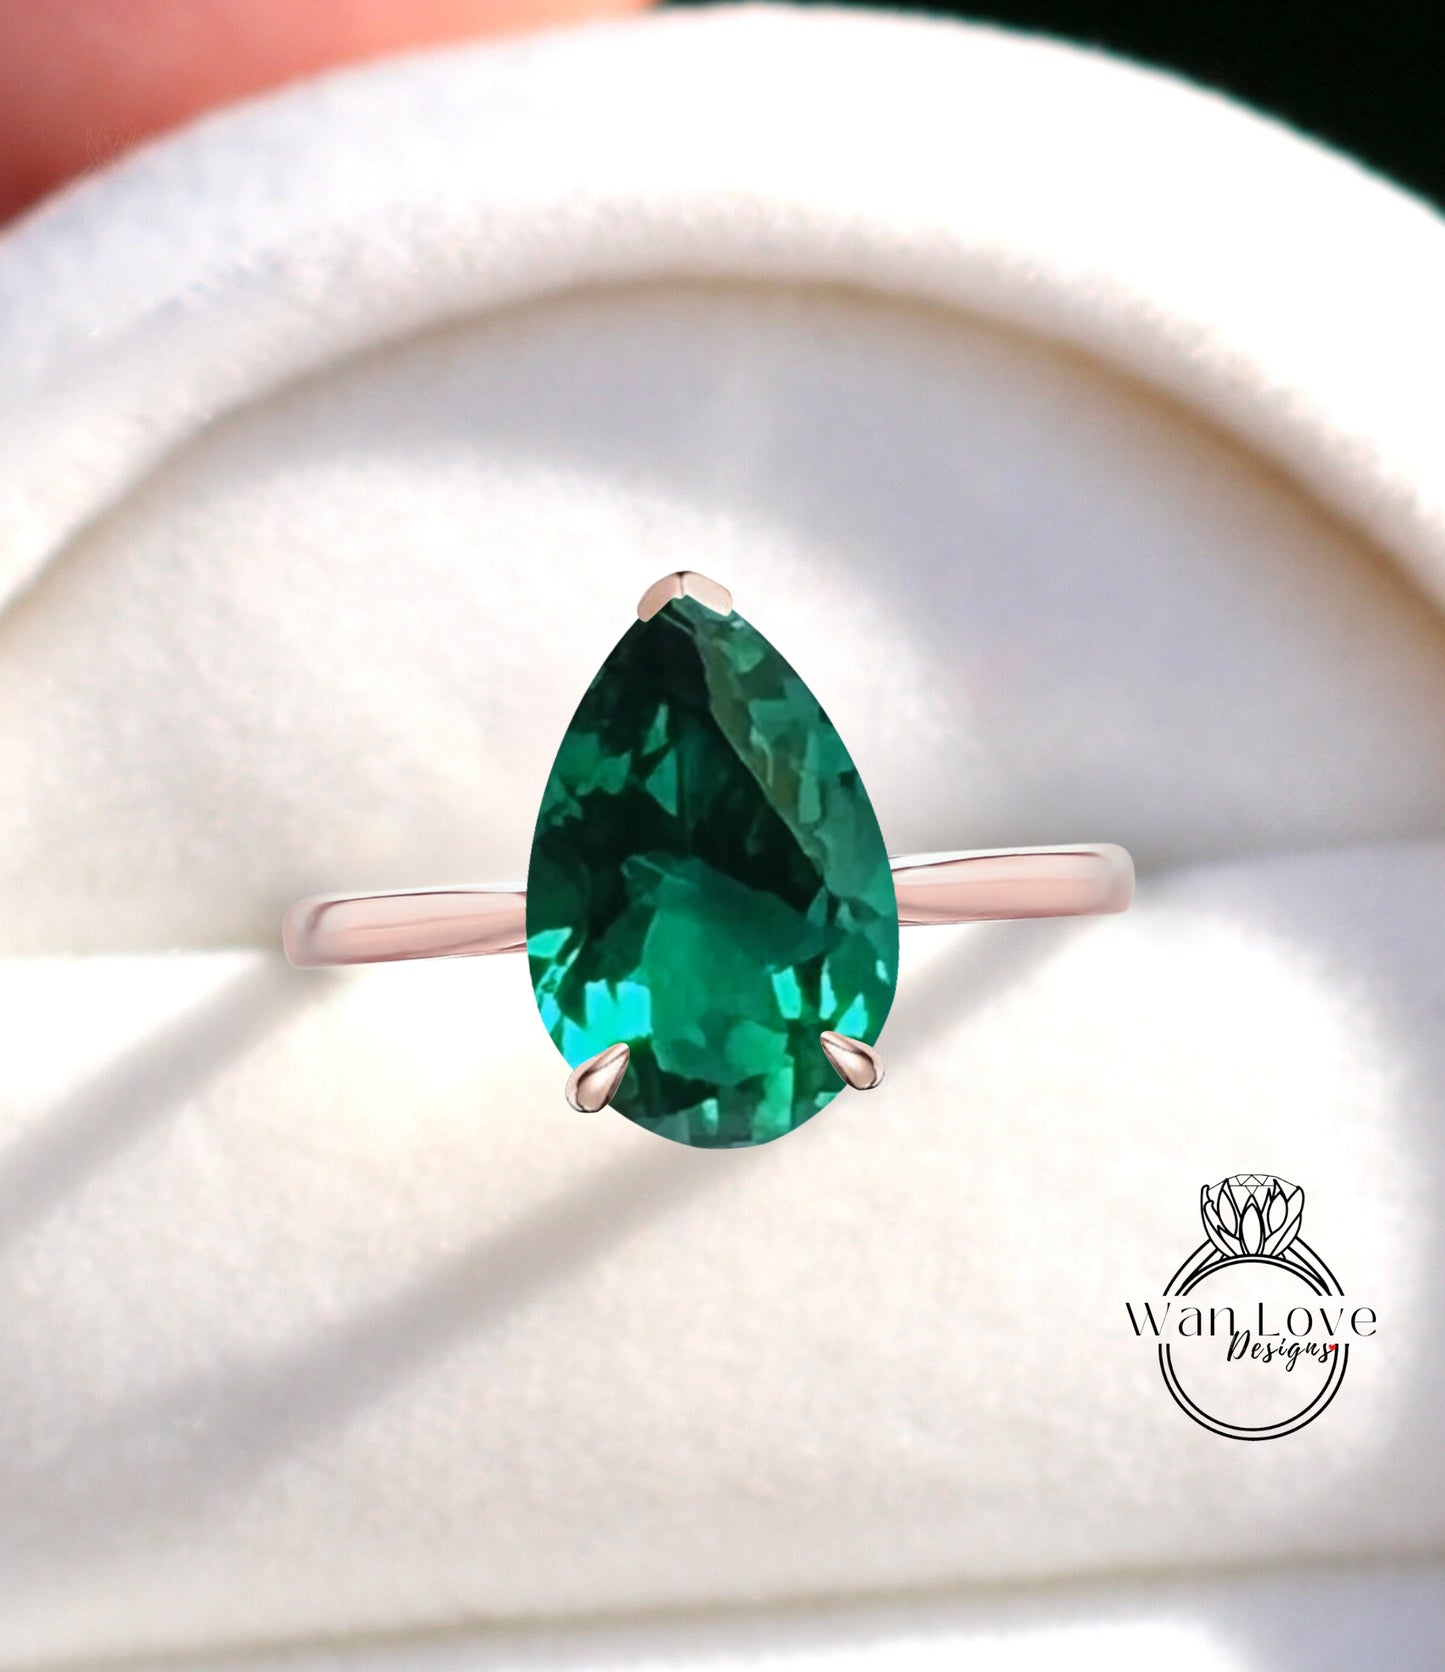 Pear Emerald Engagement Ring Antique White Gold Side Halo Diamond dainty Ring Art Deco Delicate Wedding Bridal Ring Anniversary Promise Ring